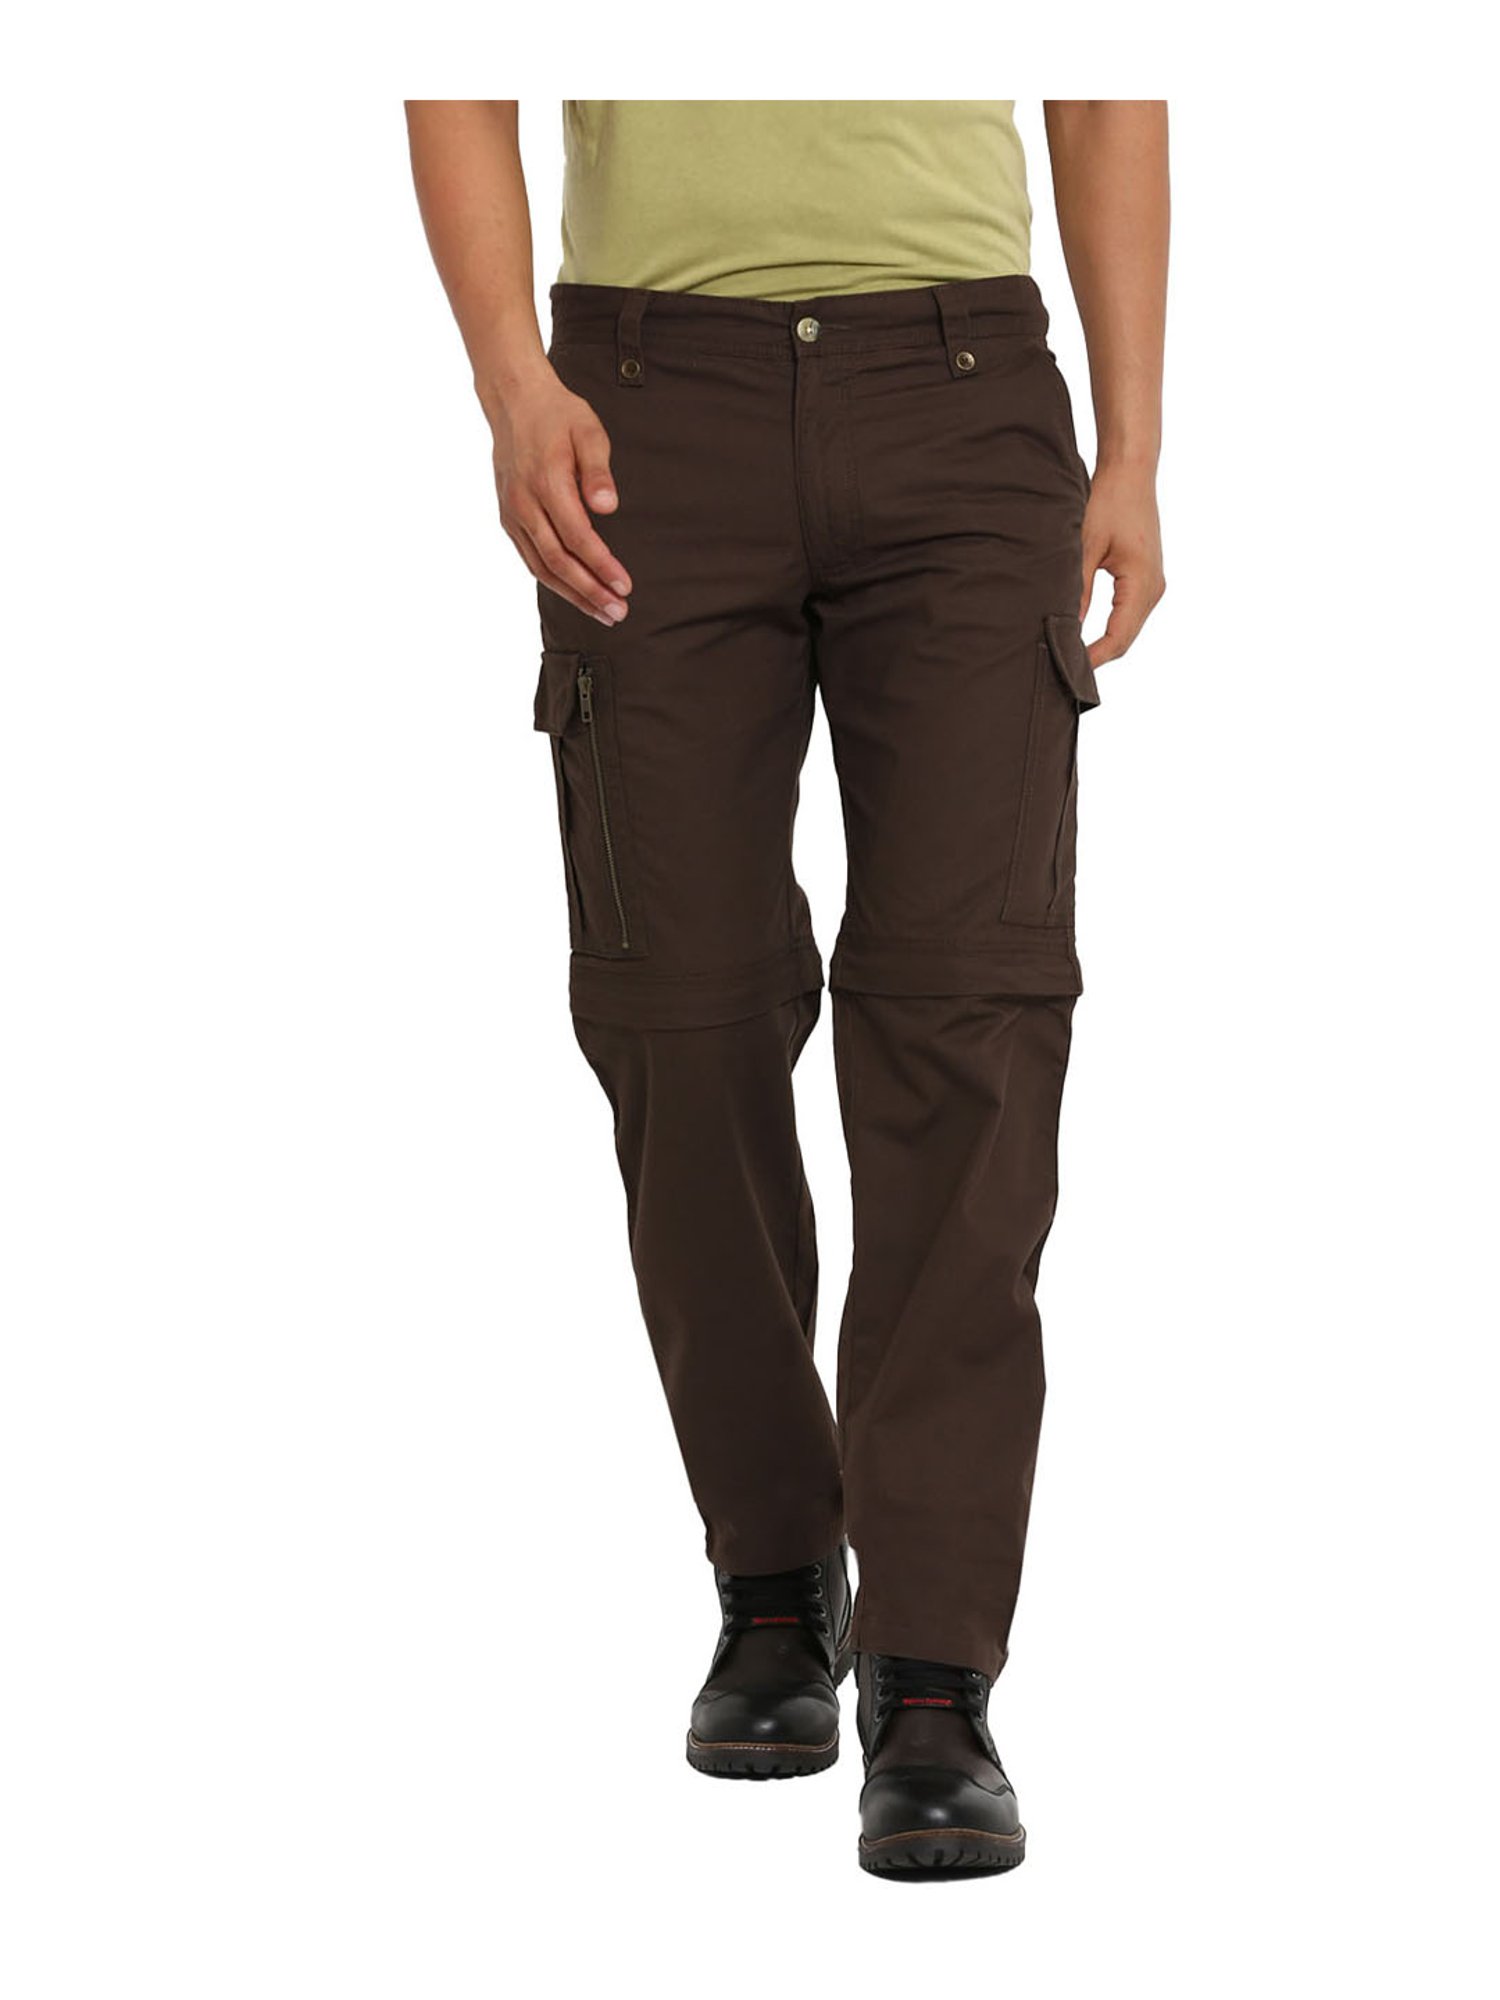 Convertible Trousers  Buy Convertible Trousers online in India